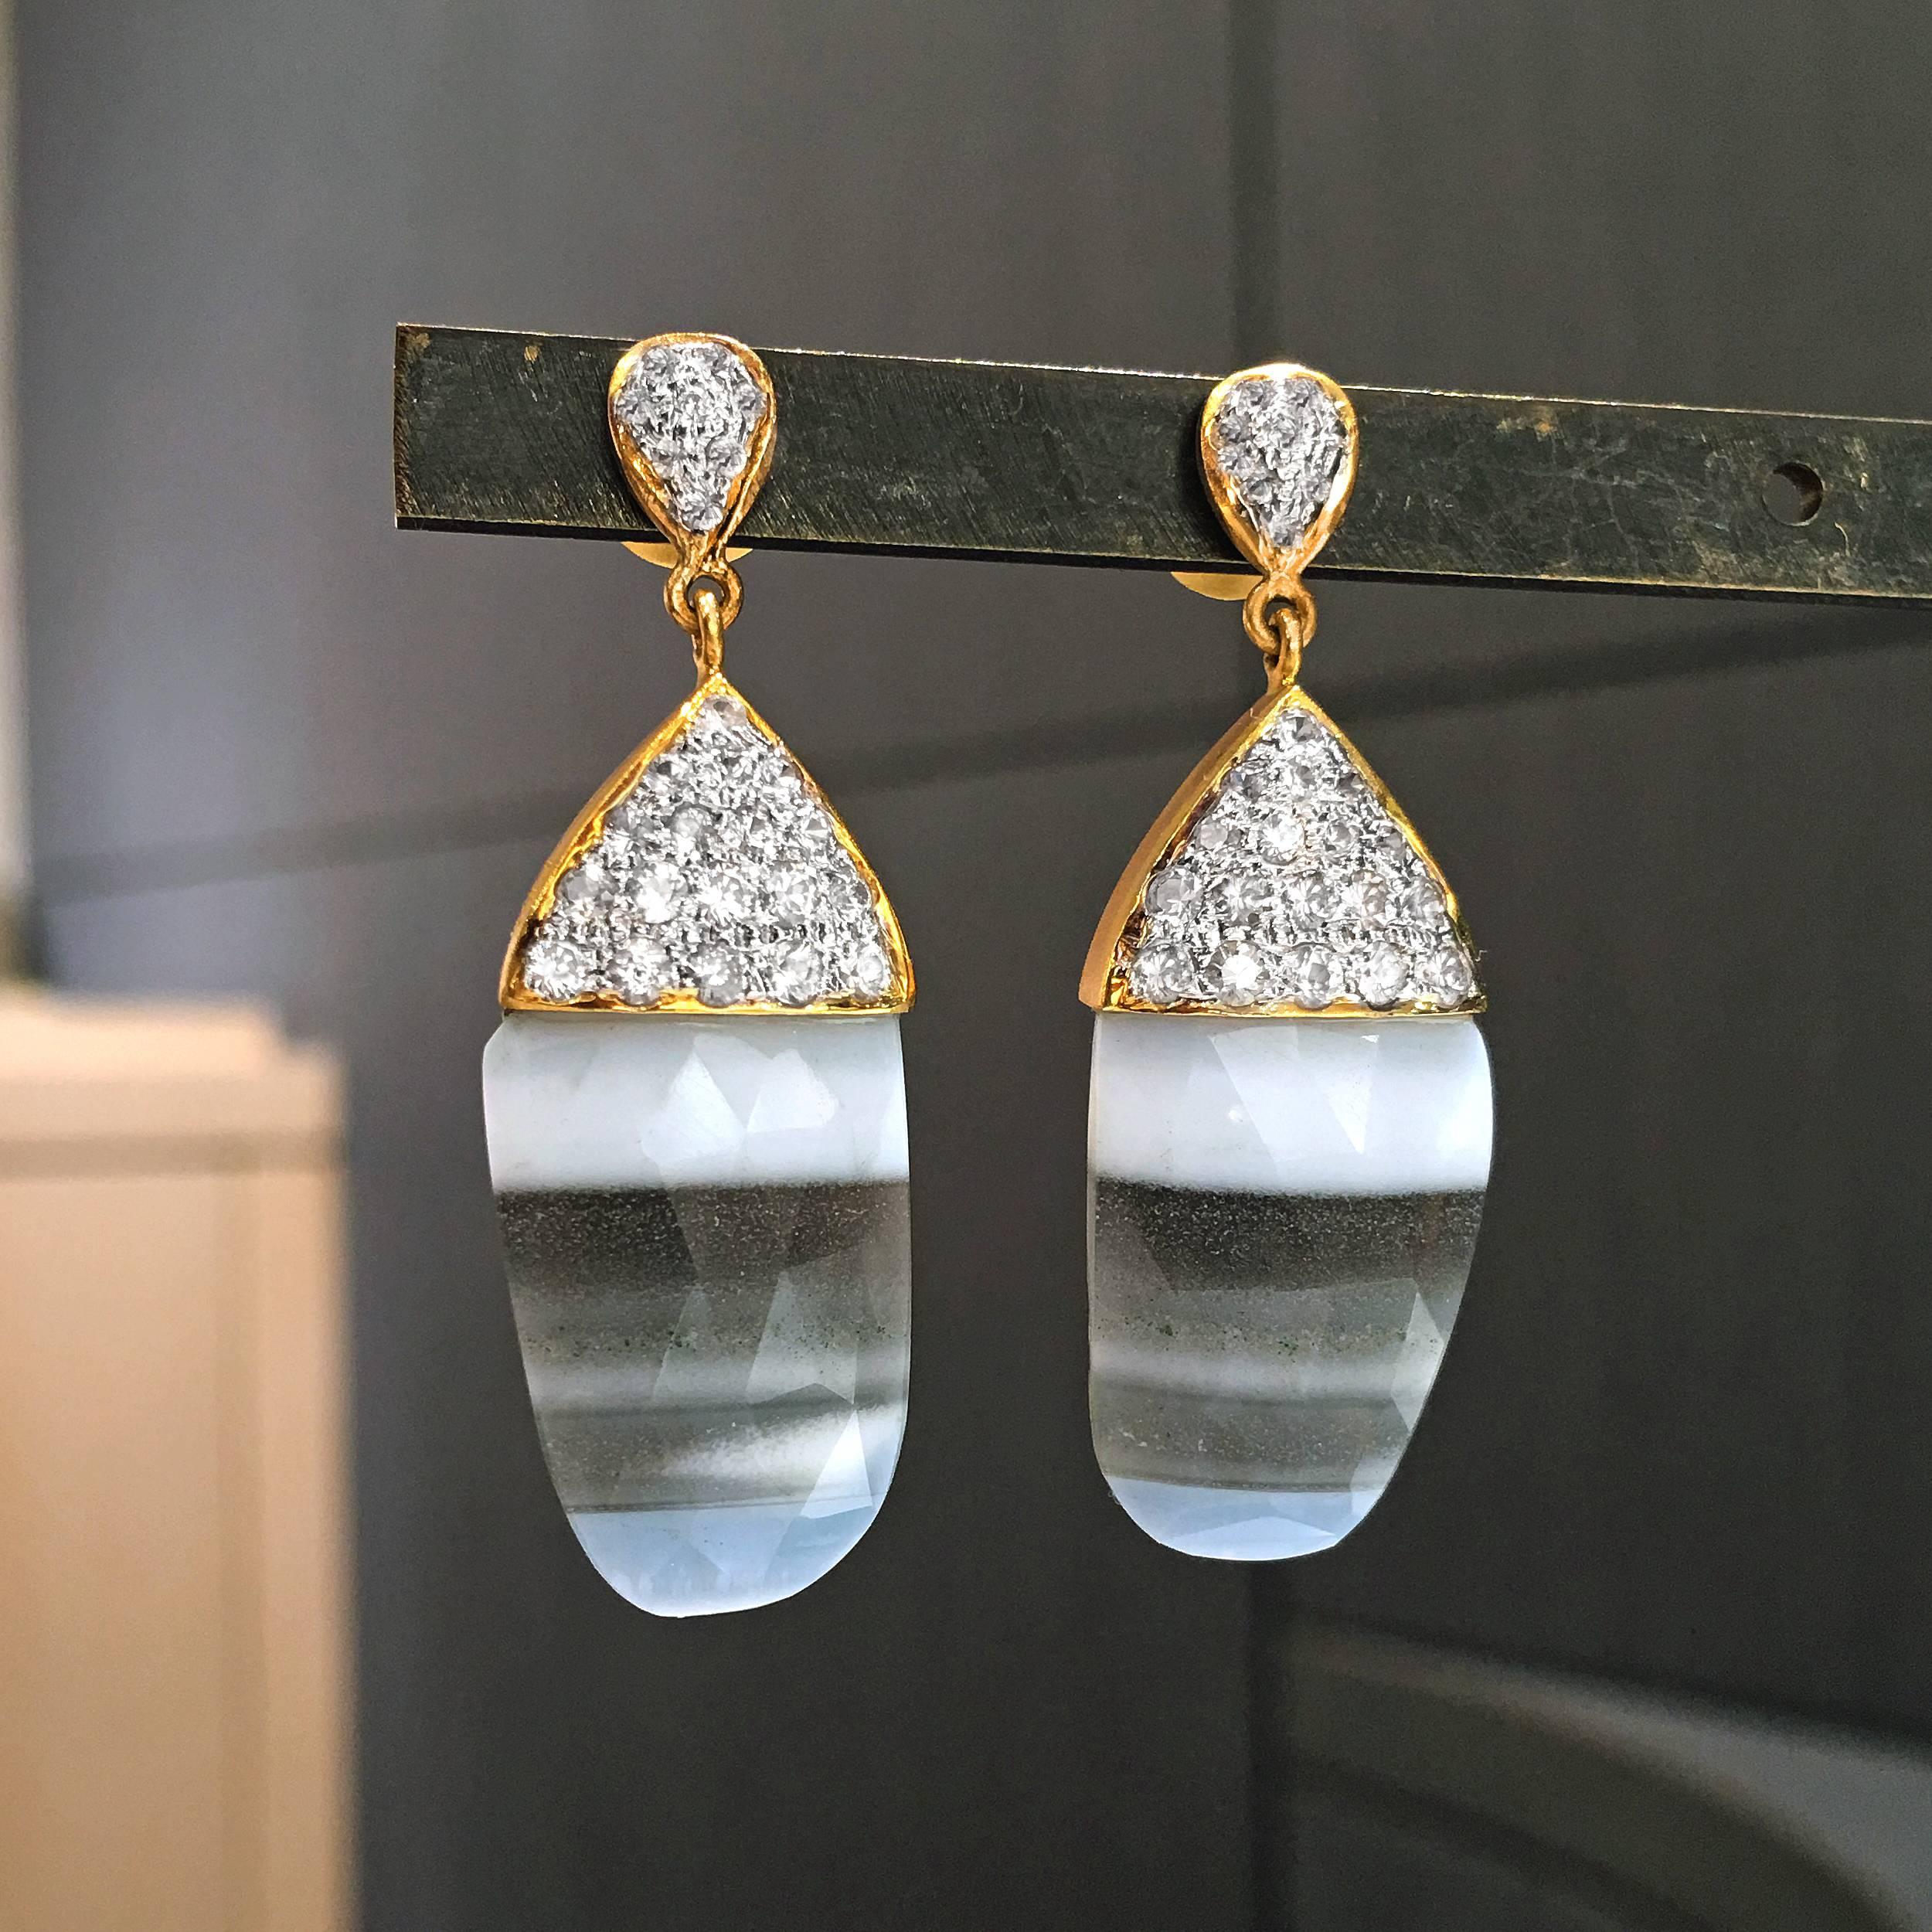 One of a Kind Earrings handmade in matte-finished 18k yellow gold by jewelry designer Lauren Harper featuring a matched pair of faceted African striped opal and white sapphires prong-set in 18k white gold. Stamped and hallmarked.